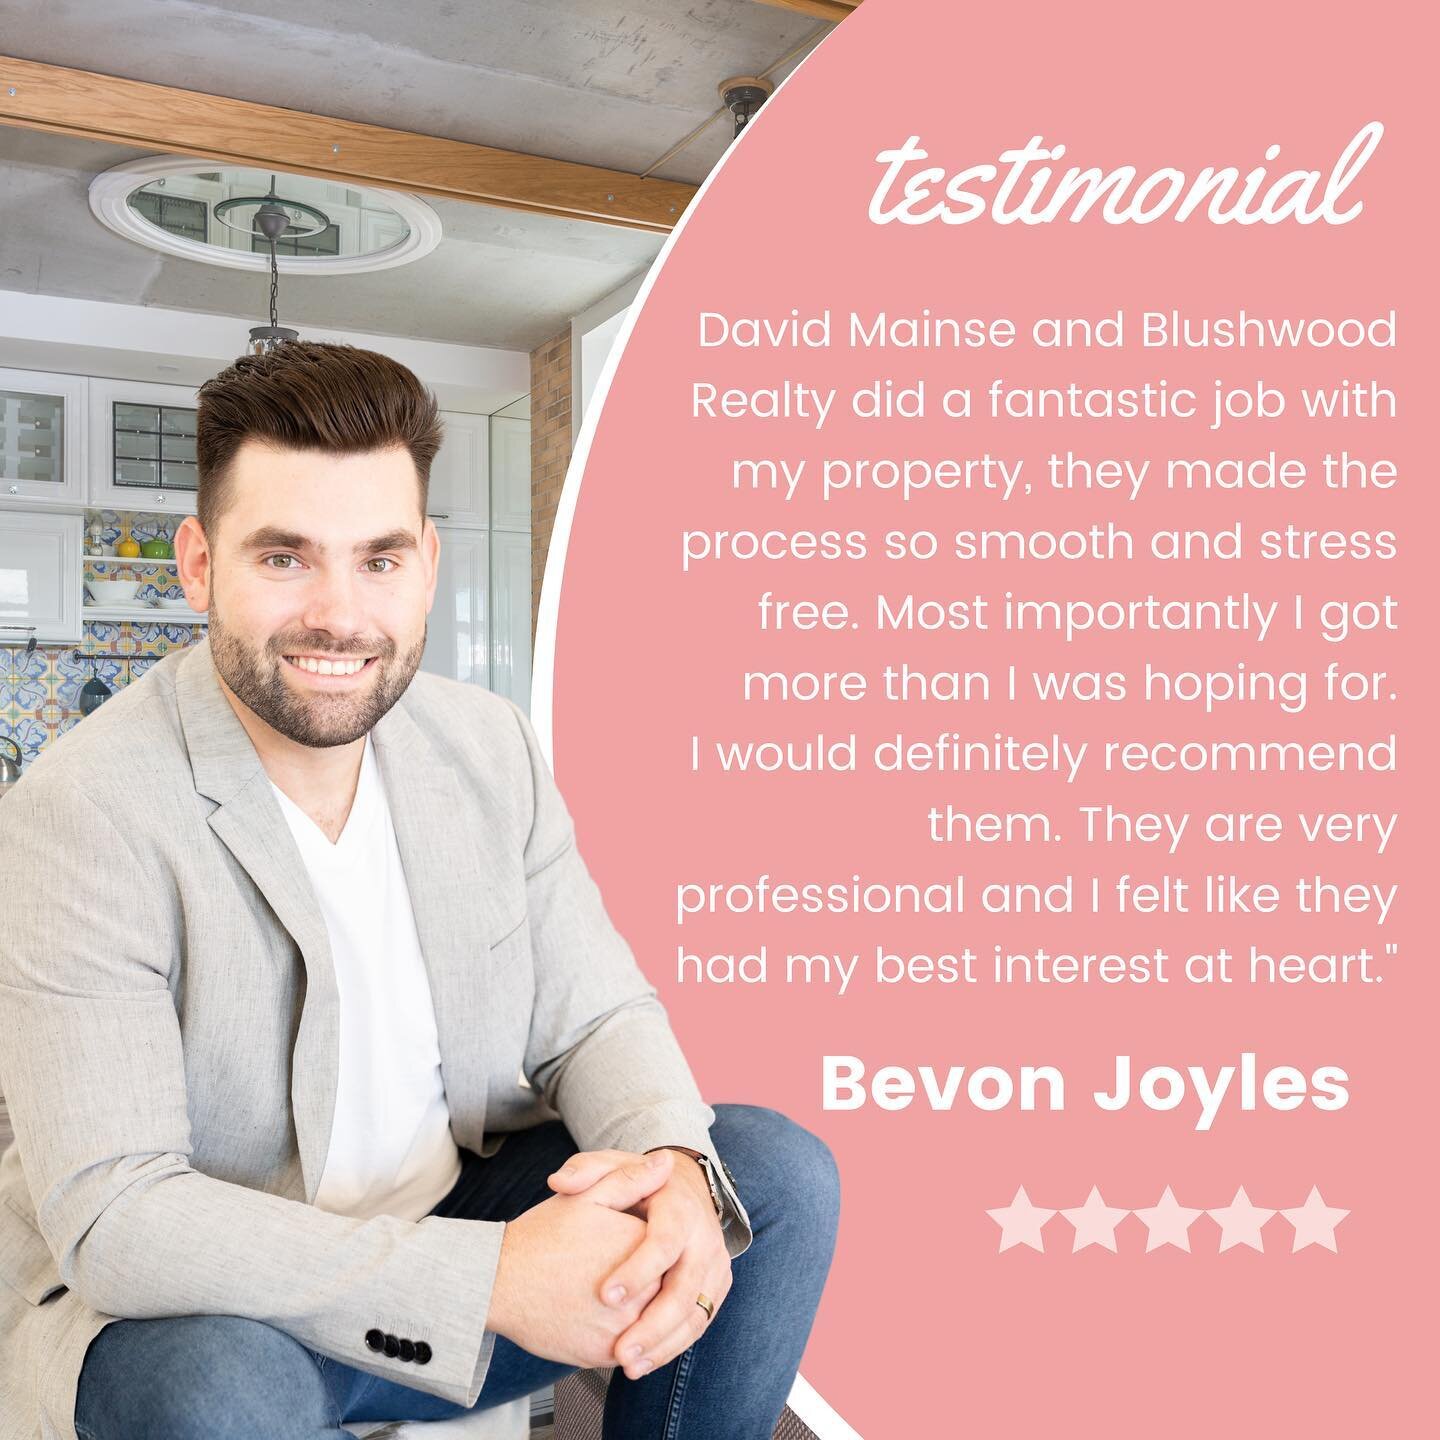 Client love for Mr. David Mainse! ⭐️⭐️⭐️⭐️⭐️